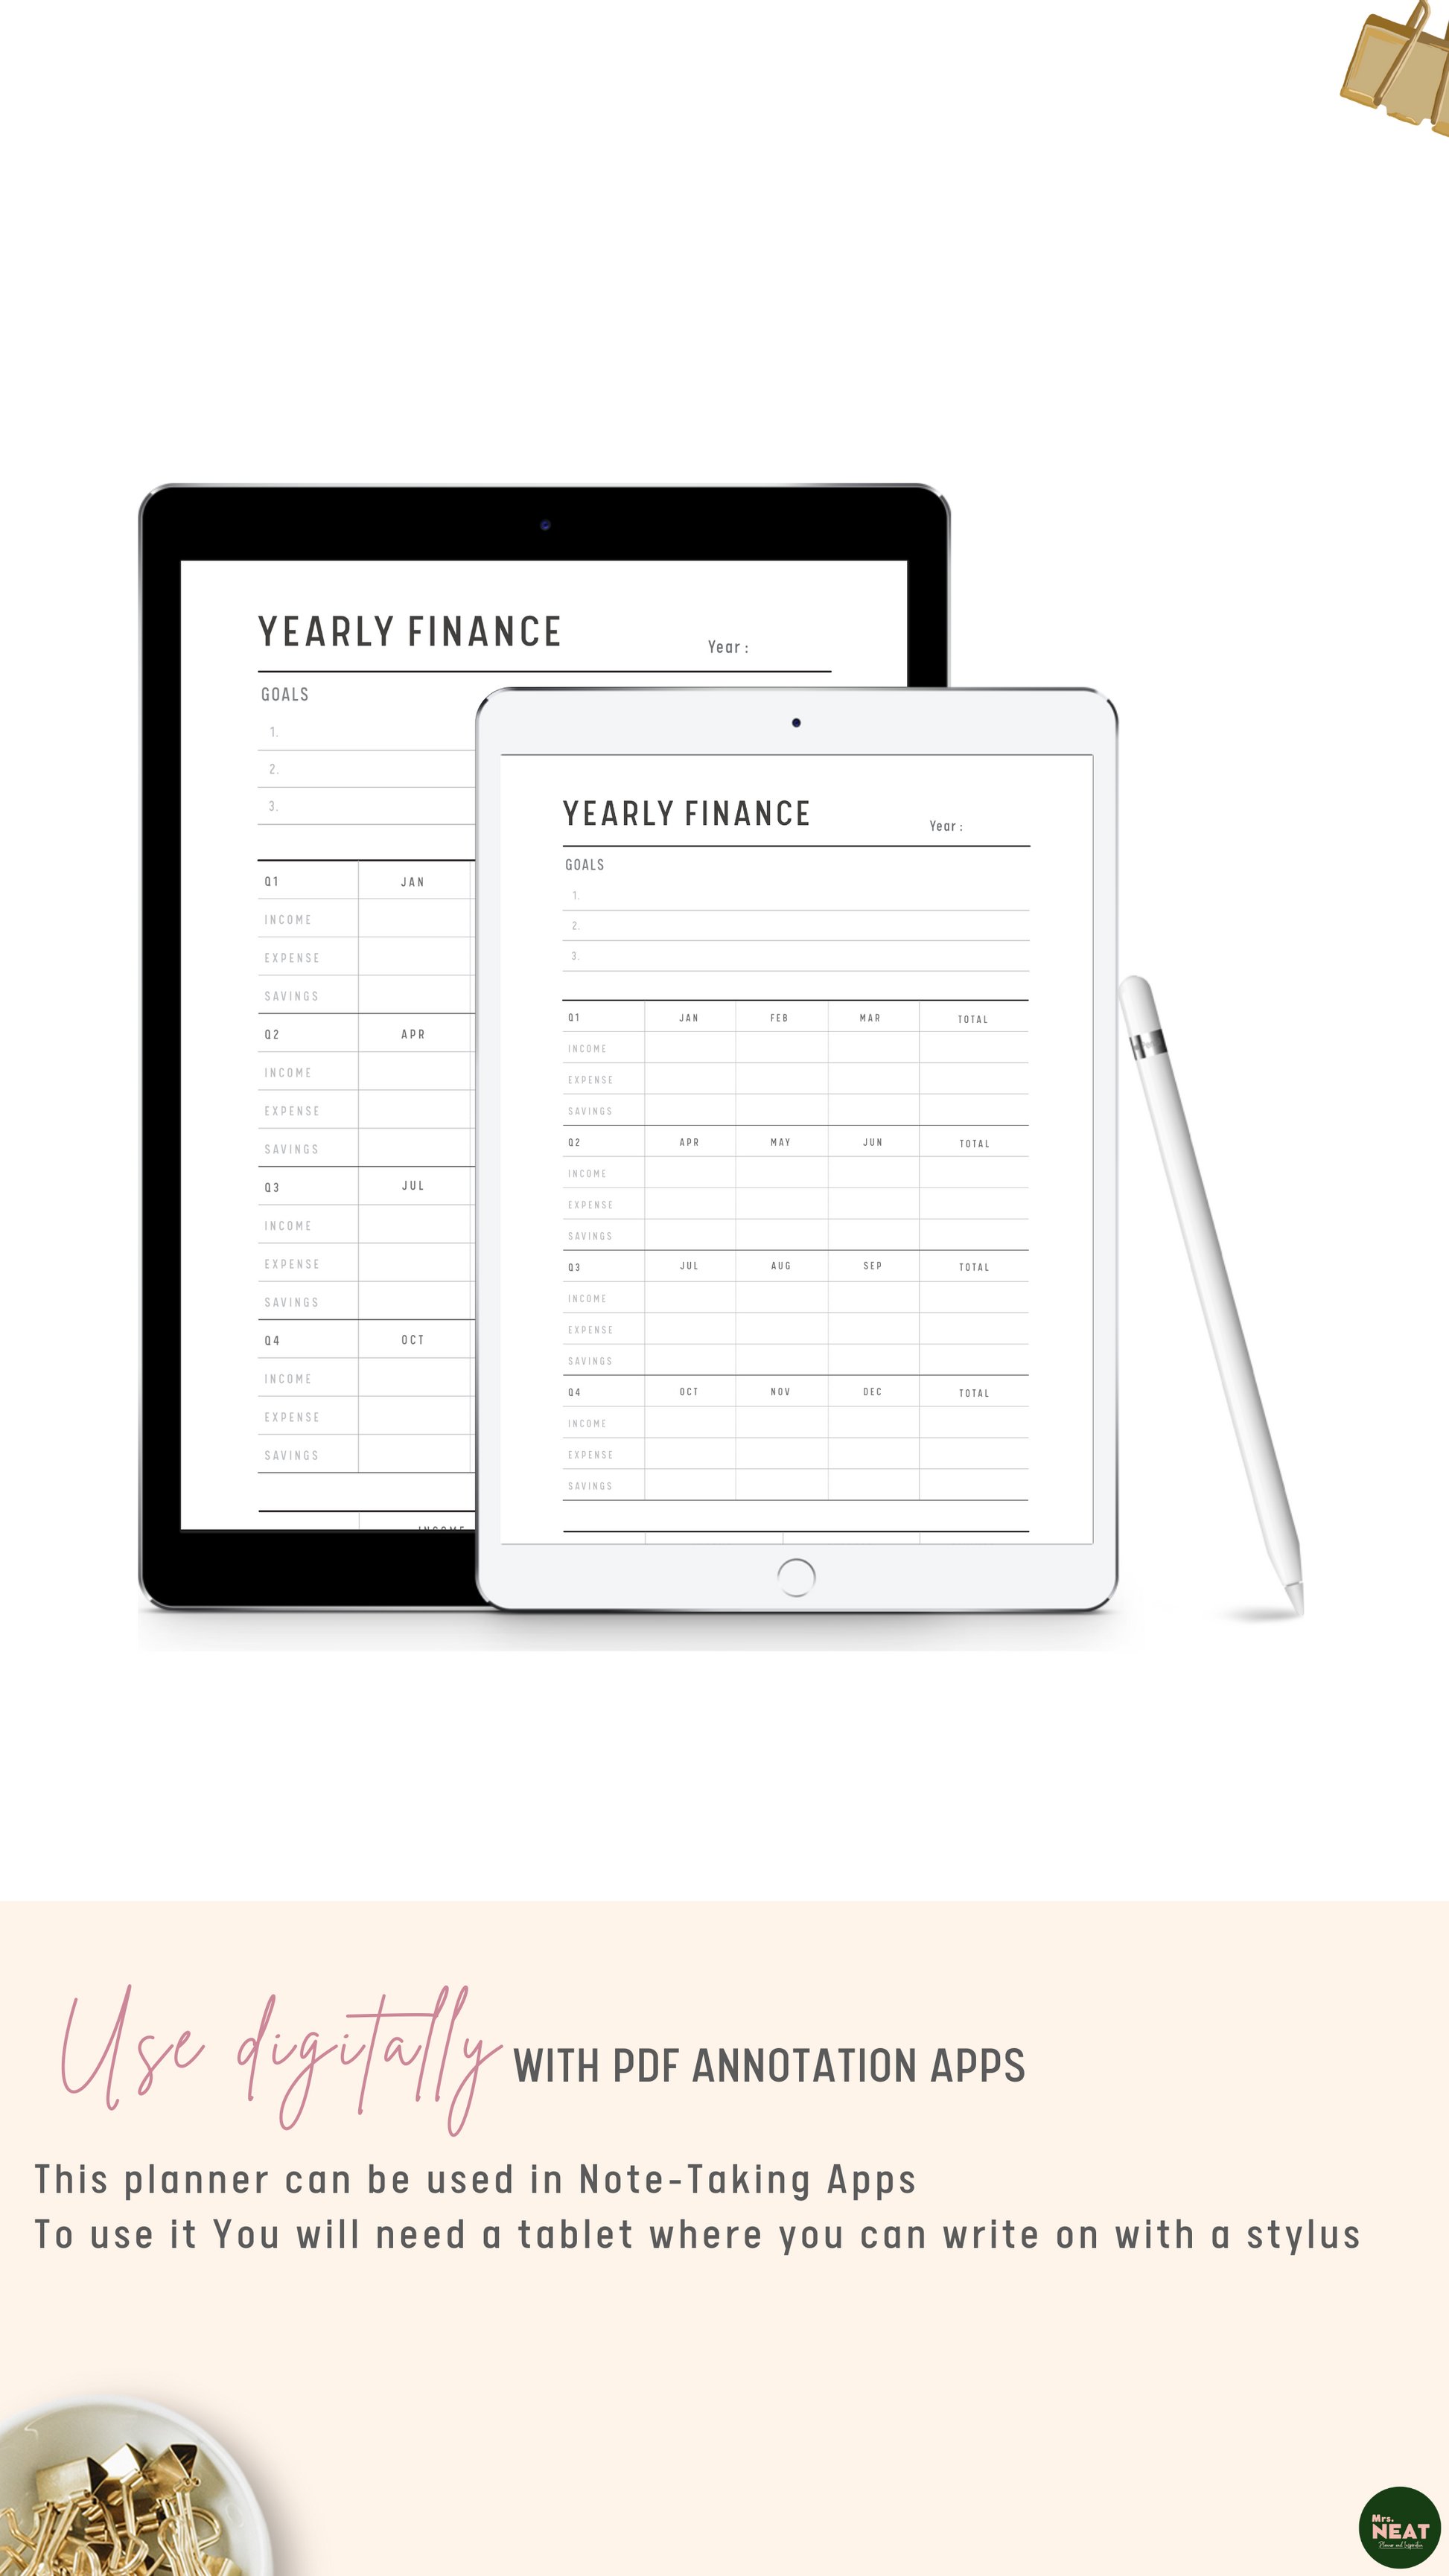 Clean Yearly Financial Planner use digitally with Tablet and Stylus